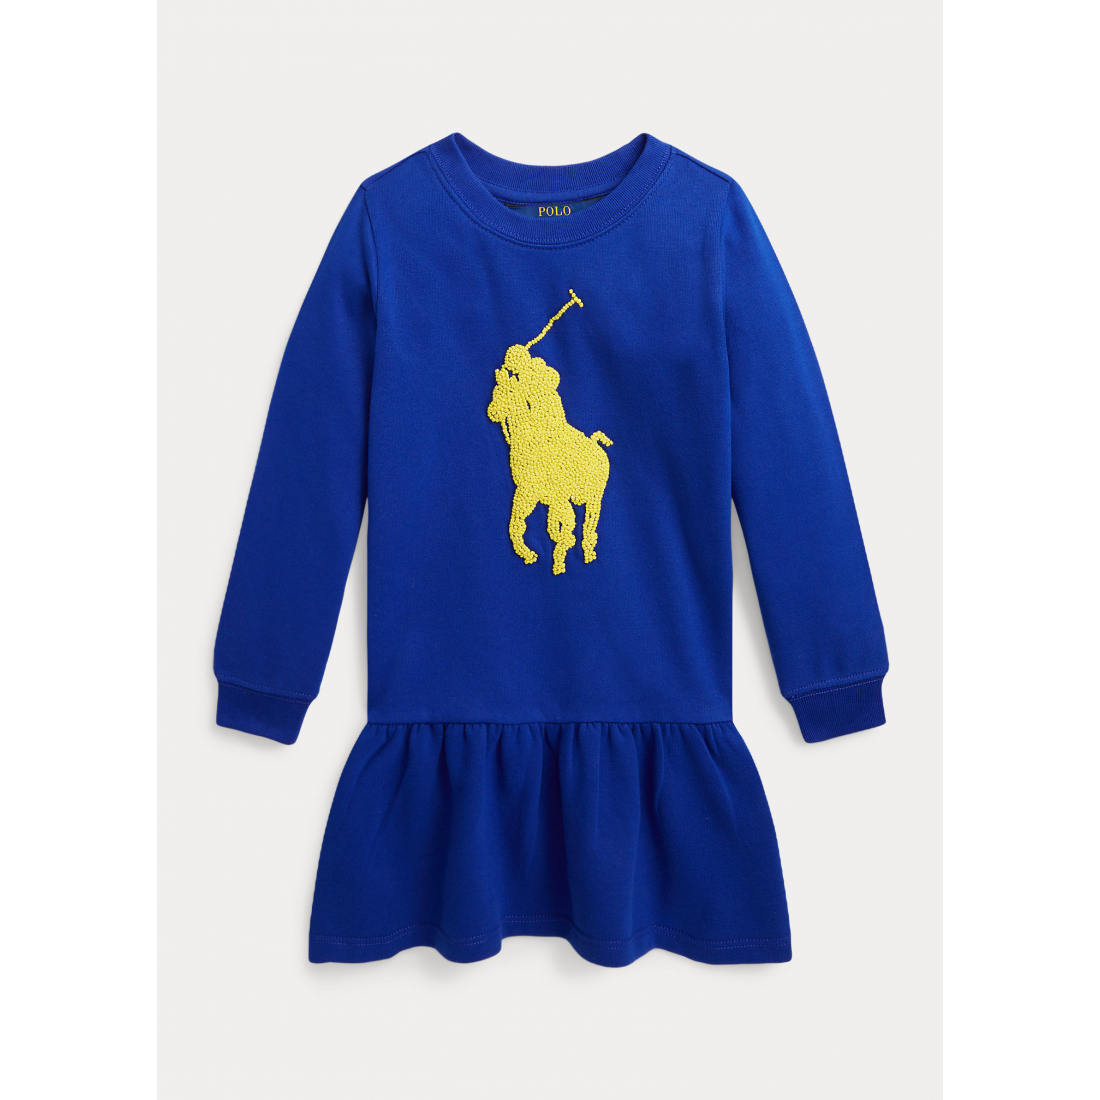 Little Girl's 'French Knot Big Pony' Long-Sleeved Dress